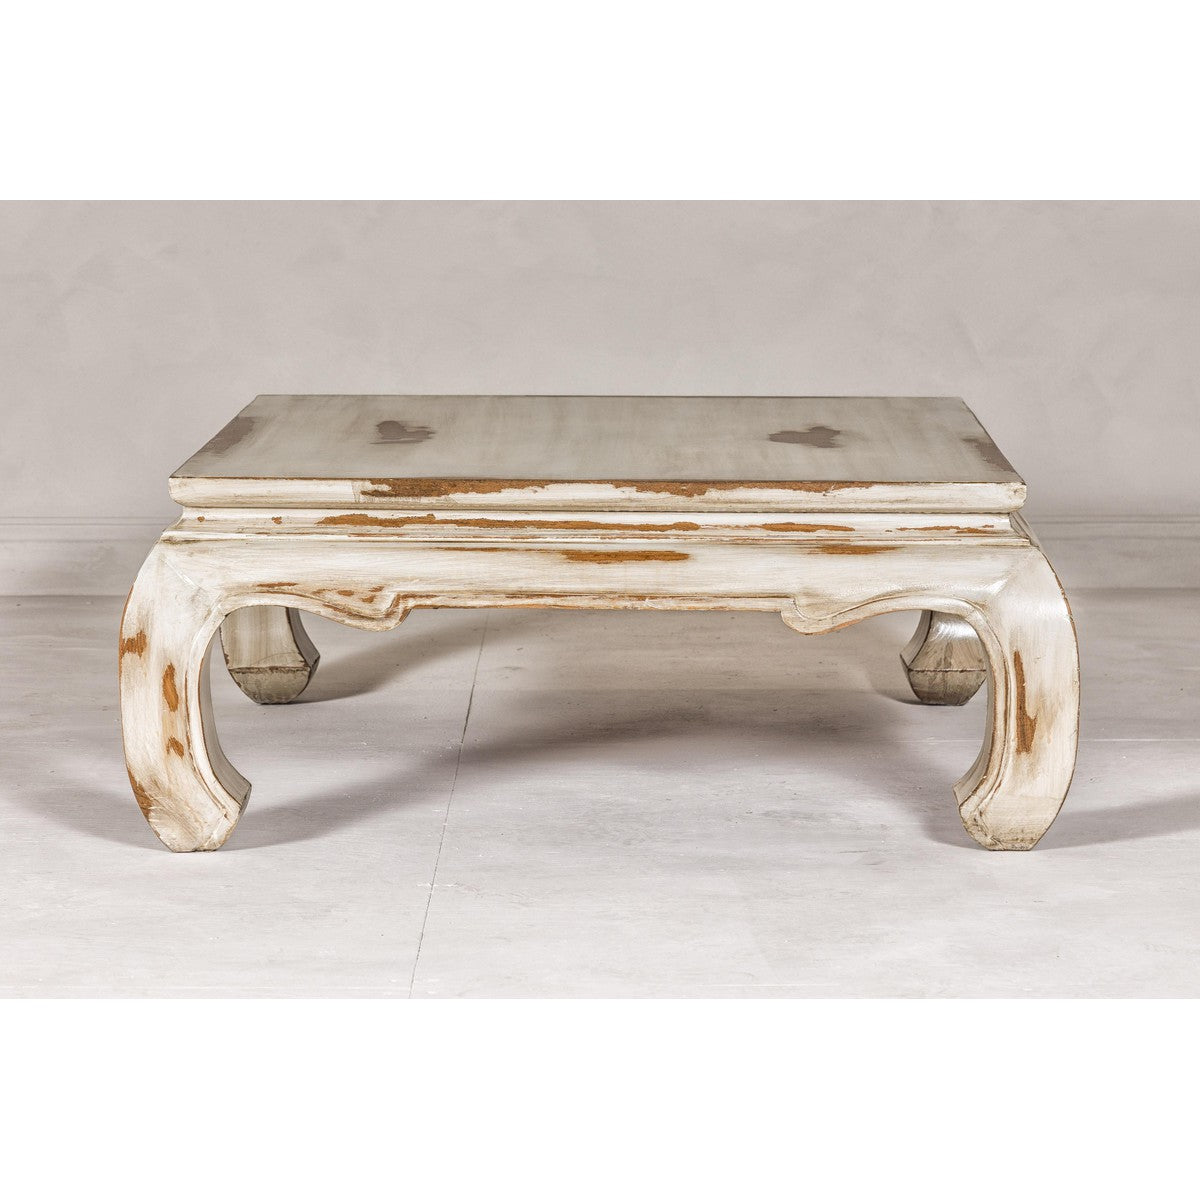 Distressed White Coffee Table with Chow Legs and Square Top, Vintage-YN7957-10. Asian & Chinese Furniture, Art, Antiques, Vintage Home Décor for sale at FEA Home